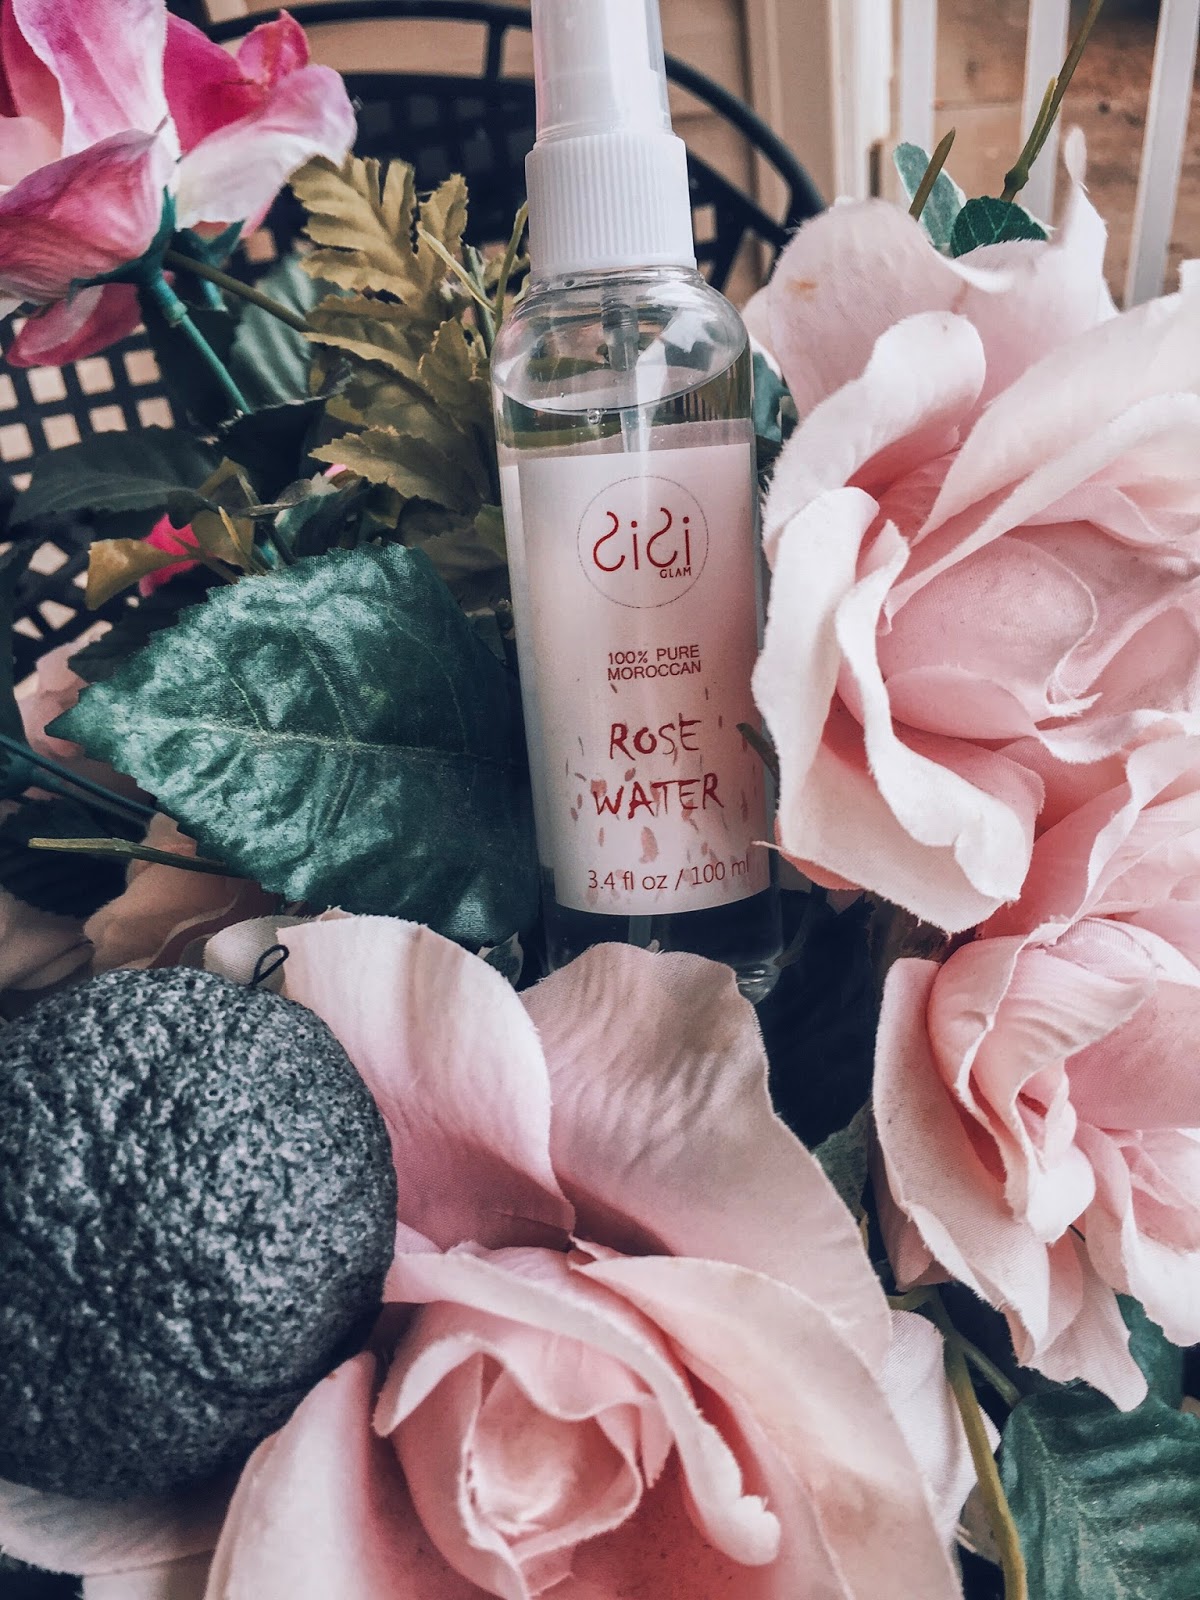 BEAUTY PRODUCT REVIEW: ROSE WATER